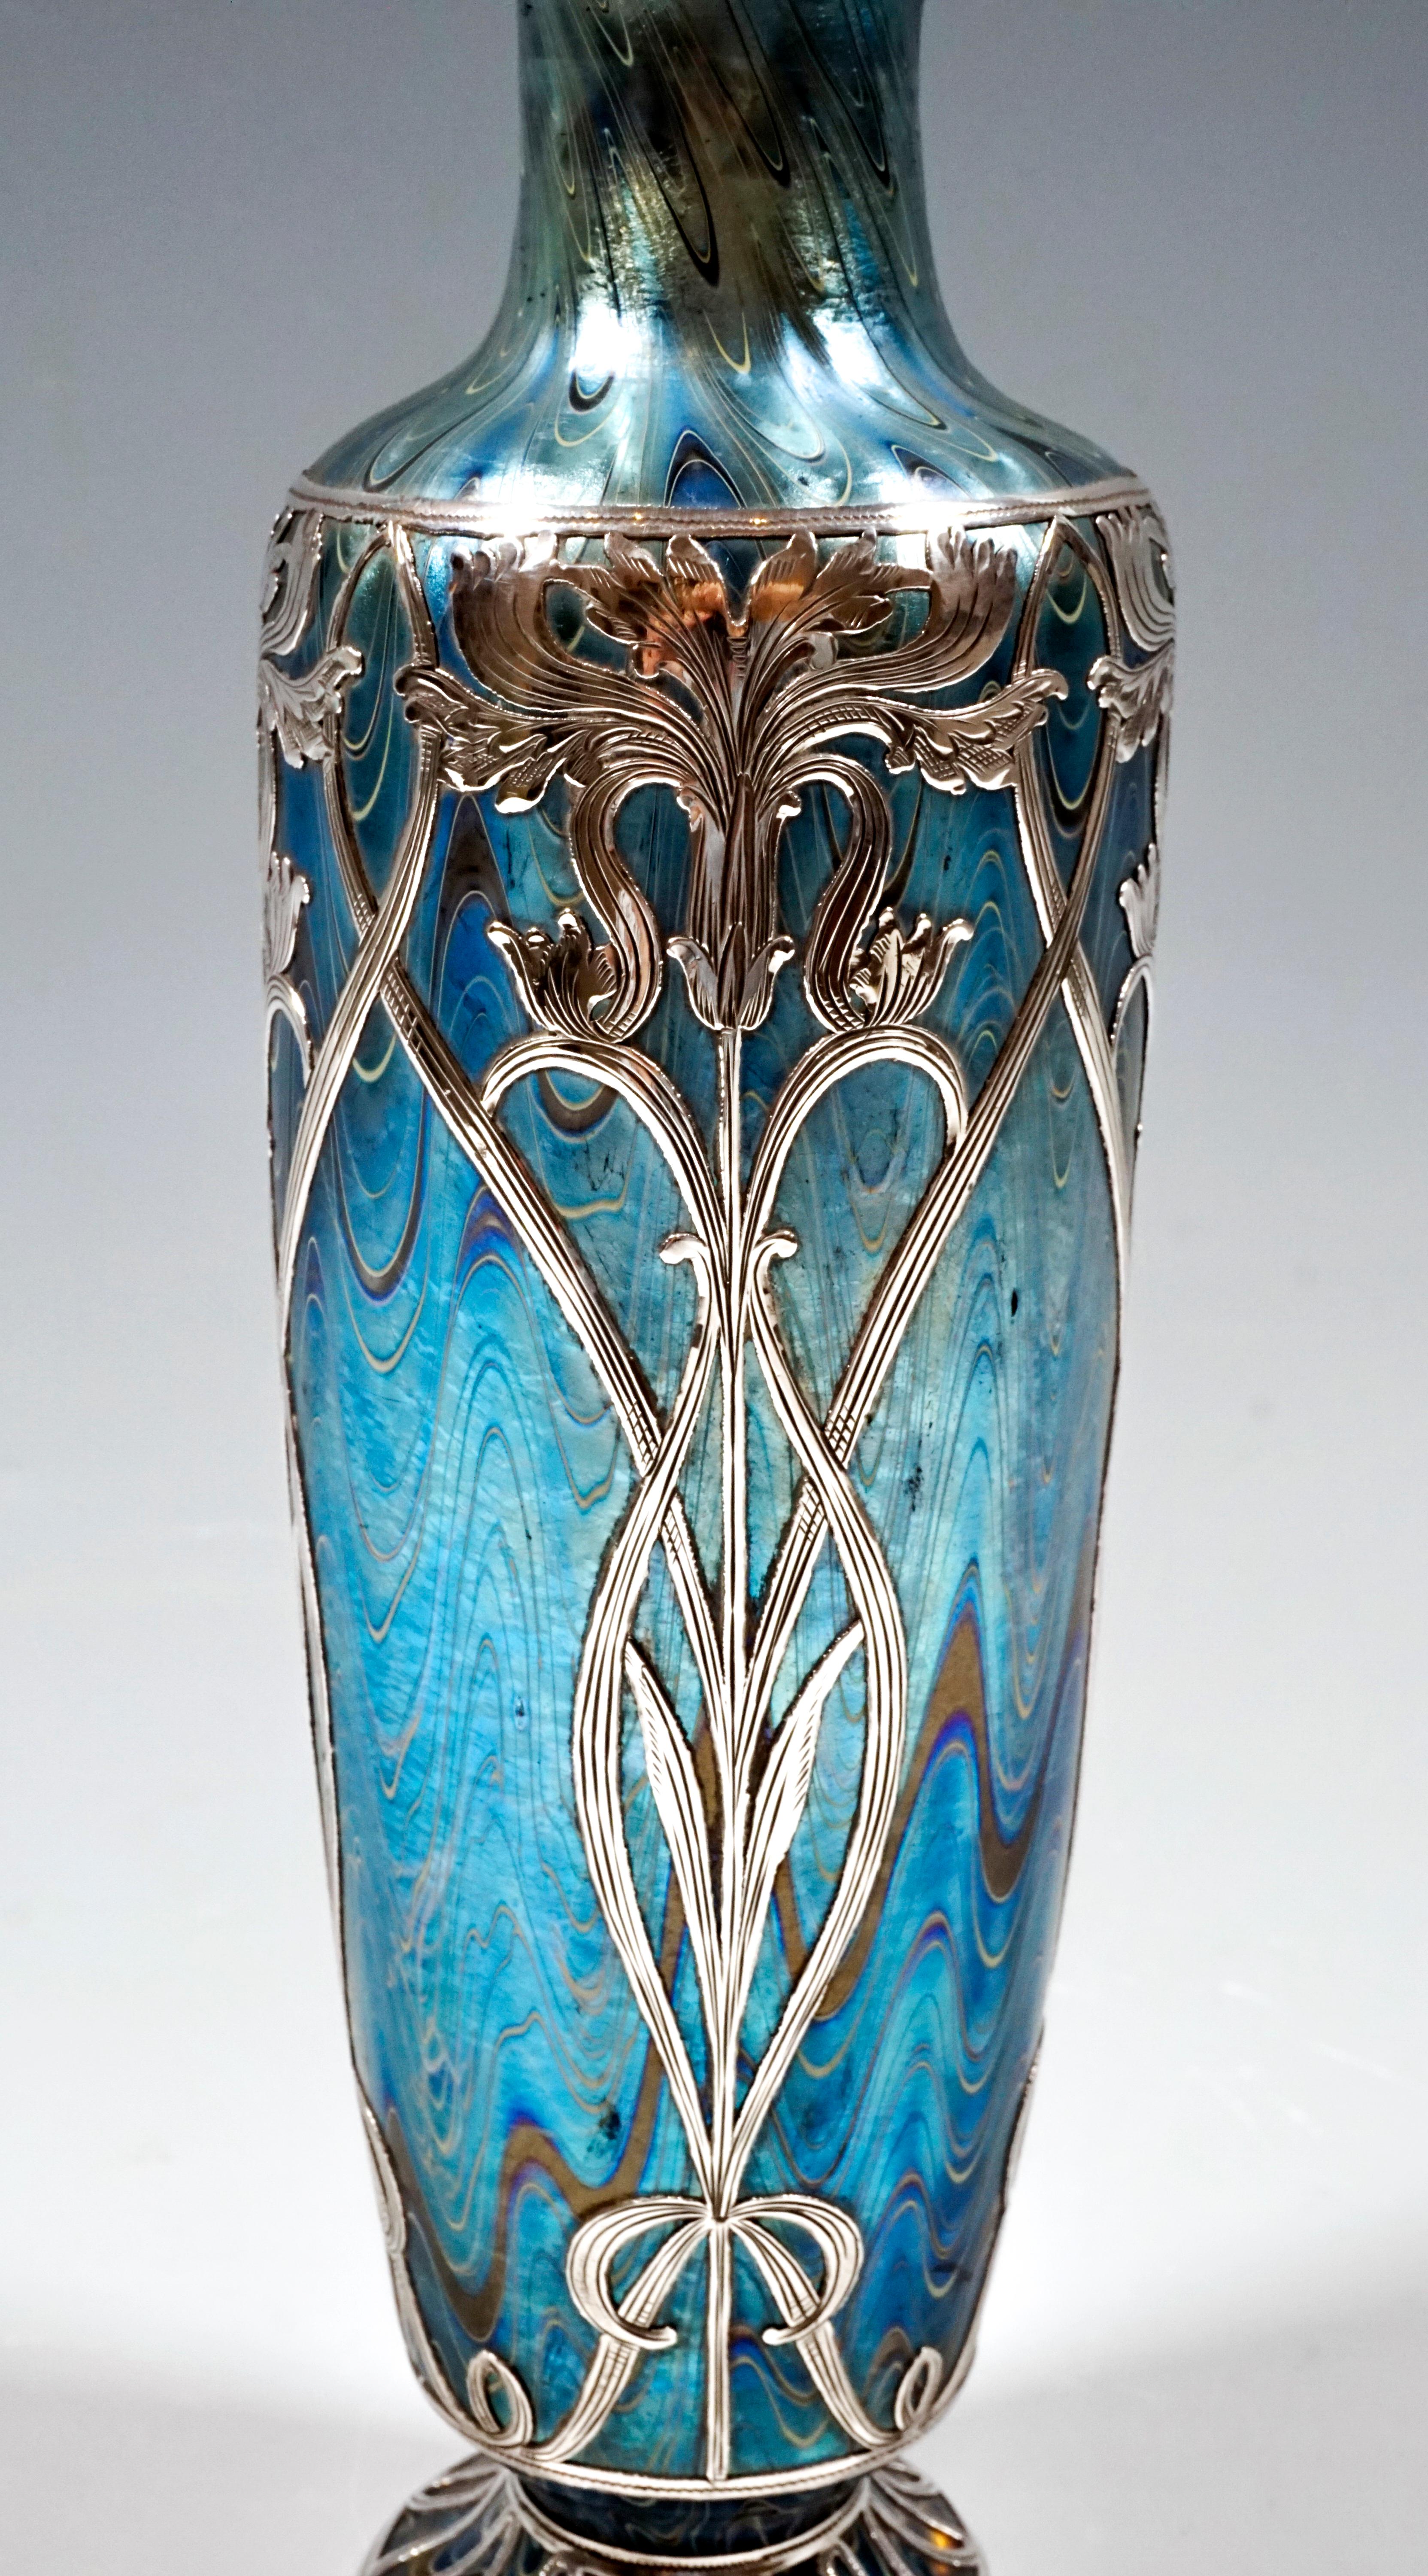 Hand-Crafted Loetz Art Nouveau Vase Phenomenon Genre Ruby 6893 with Silver Overlay circa 1899